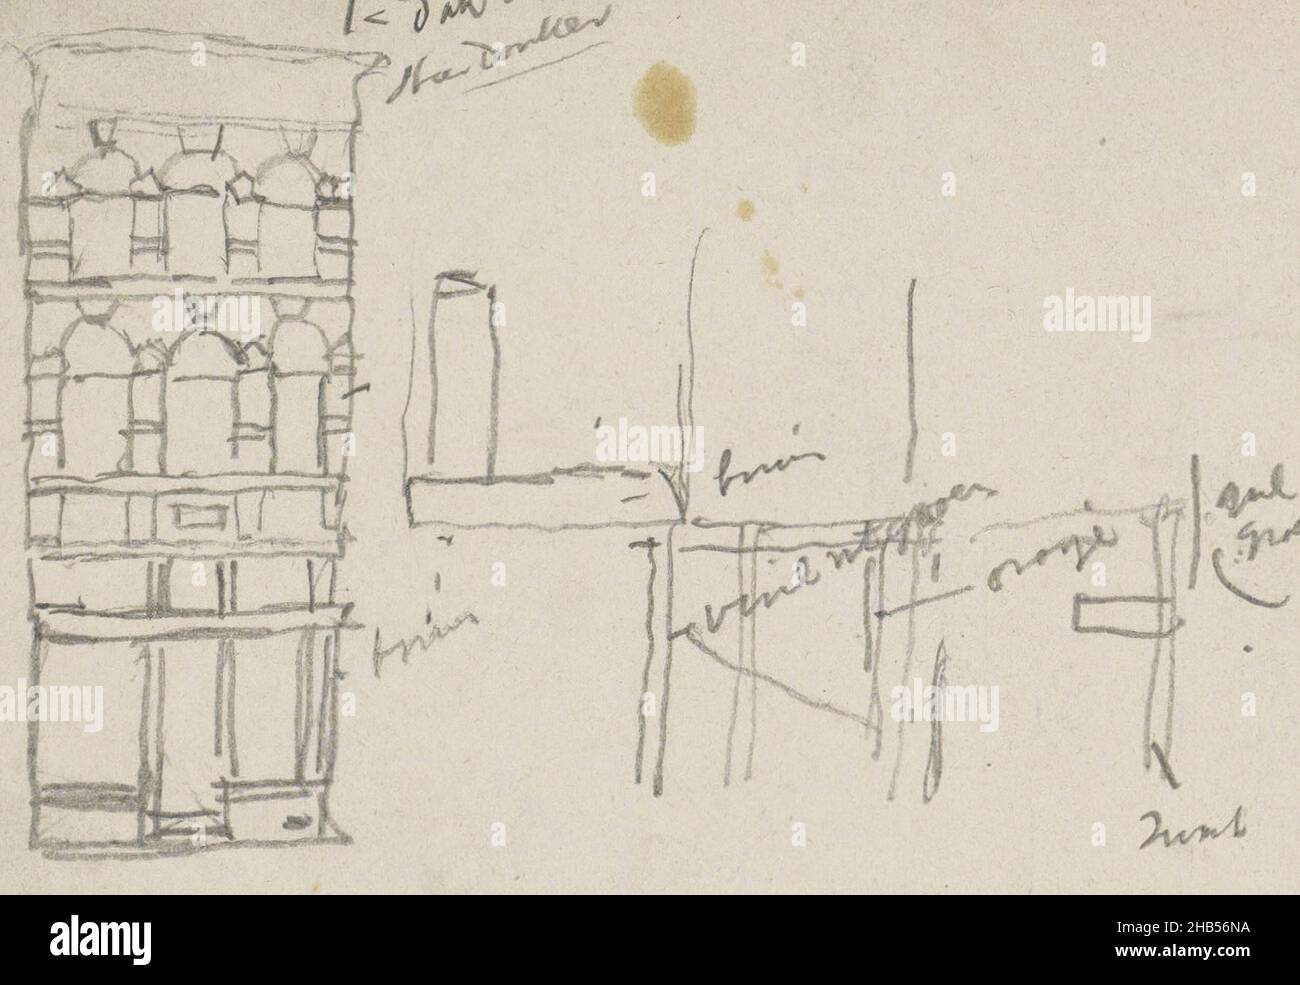 Under a facade. Above a construction or masonry bandage. Page 90 from a sketchbook with 46 sheets, Architecture studies., draughtsman: George Hendrik Breitner, Amsterdam, c. 1903, George Hendrik Breitner, c. 1903 Stock Photo